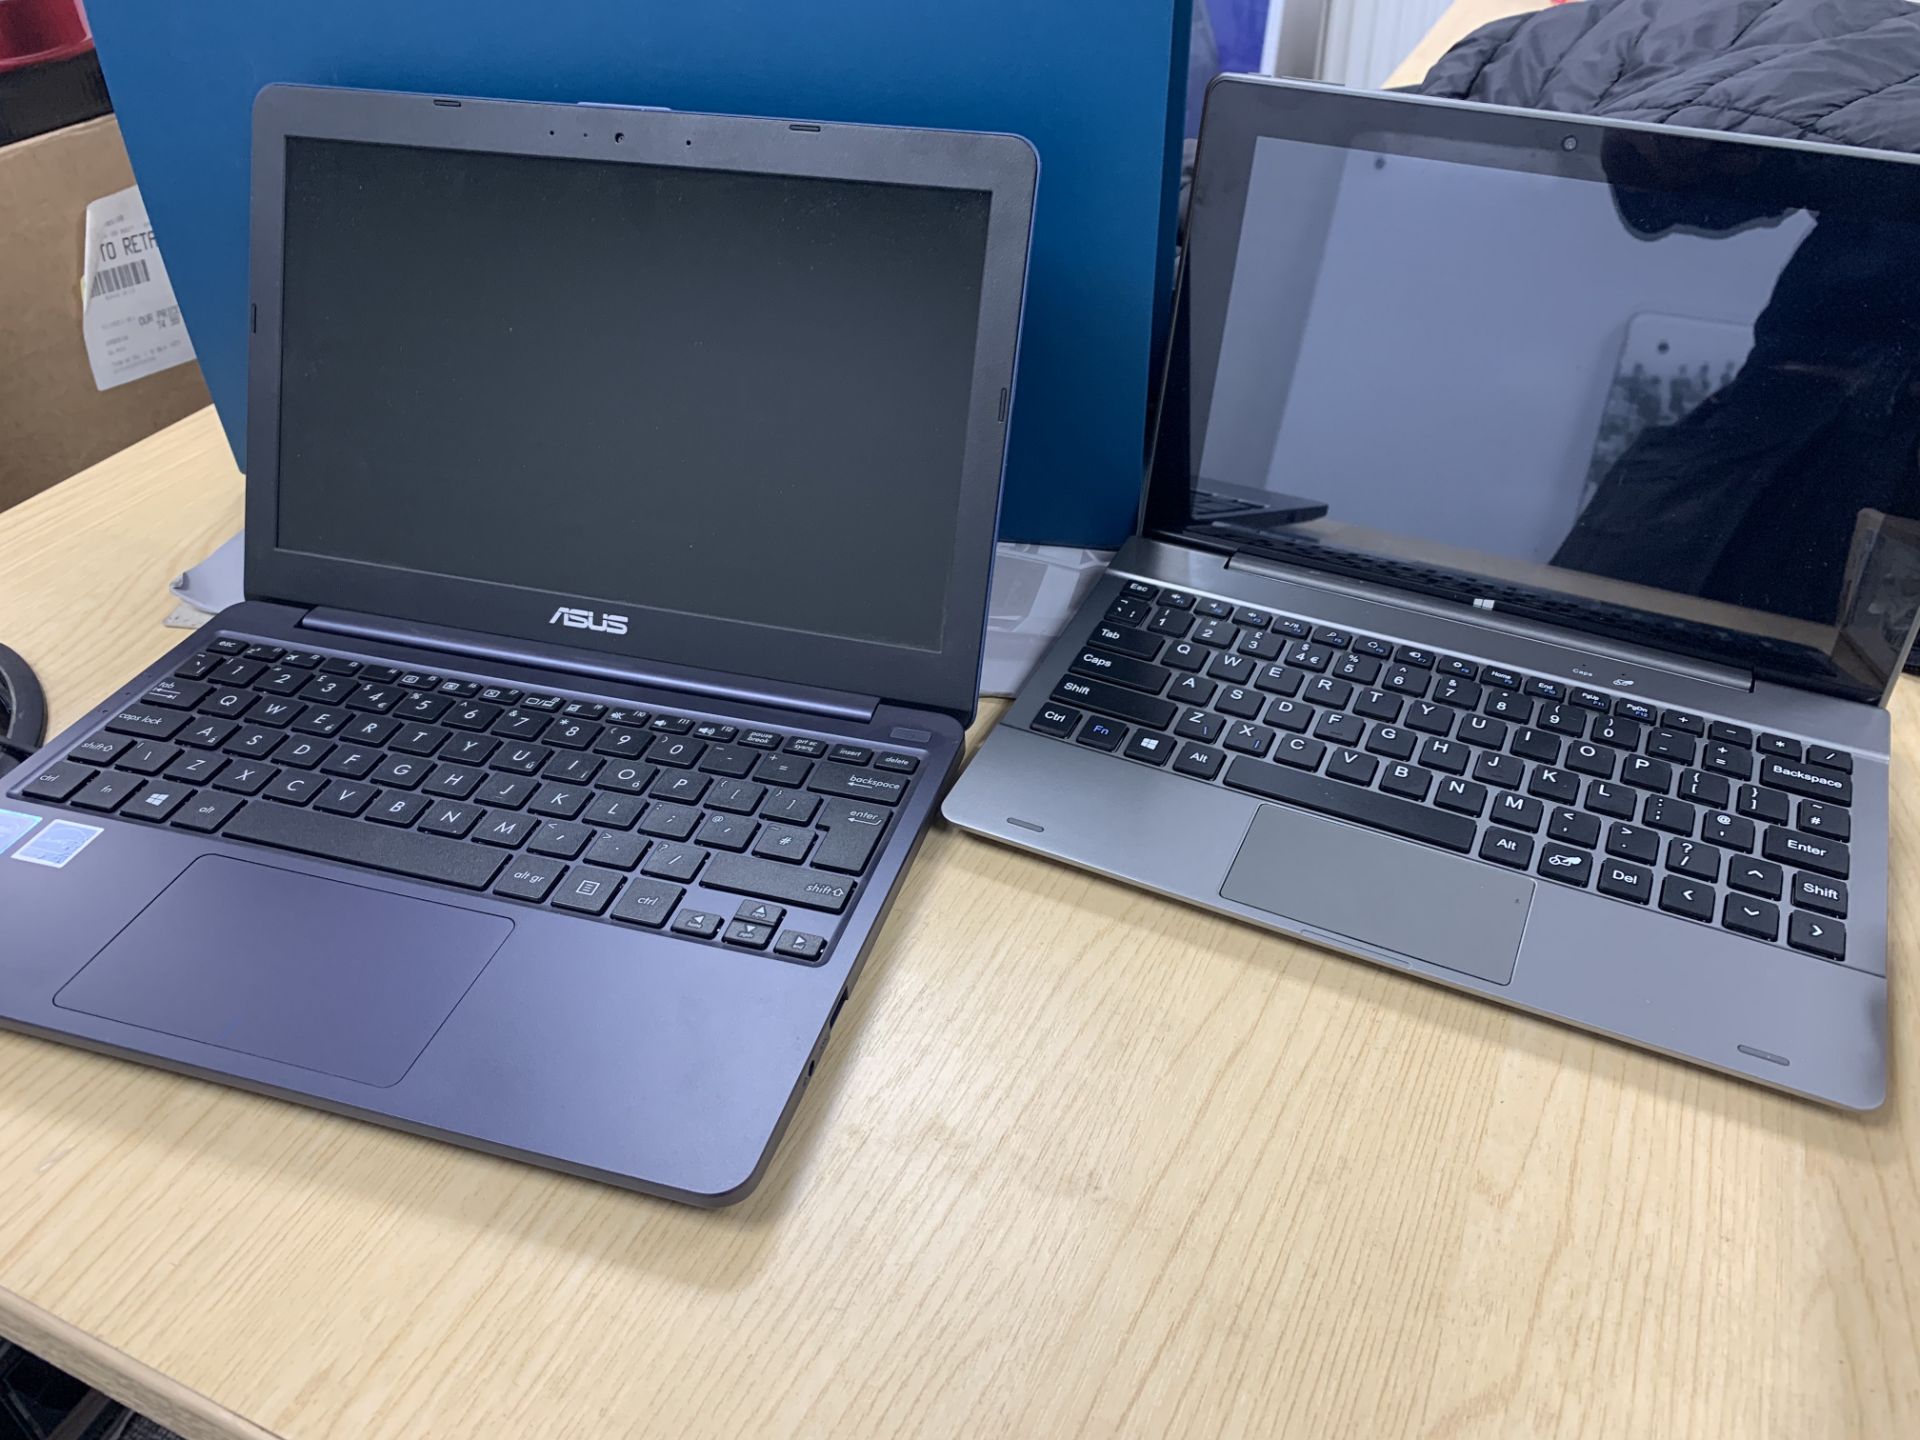 2 X NOTEBOOKS IE DUO.TAB AND ASUS WITH CHARGERS ( PLEASE NOTE THESE ITEMS ARE RETURNS )